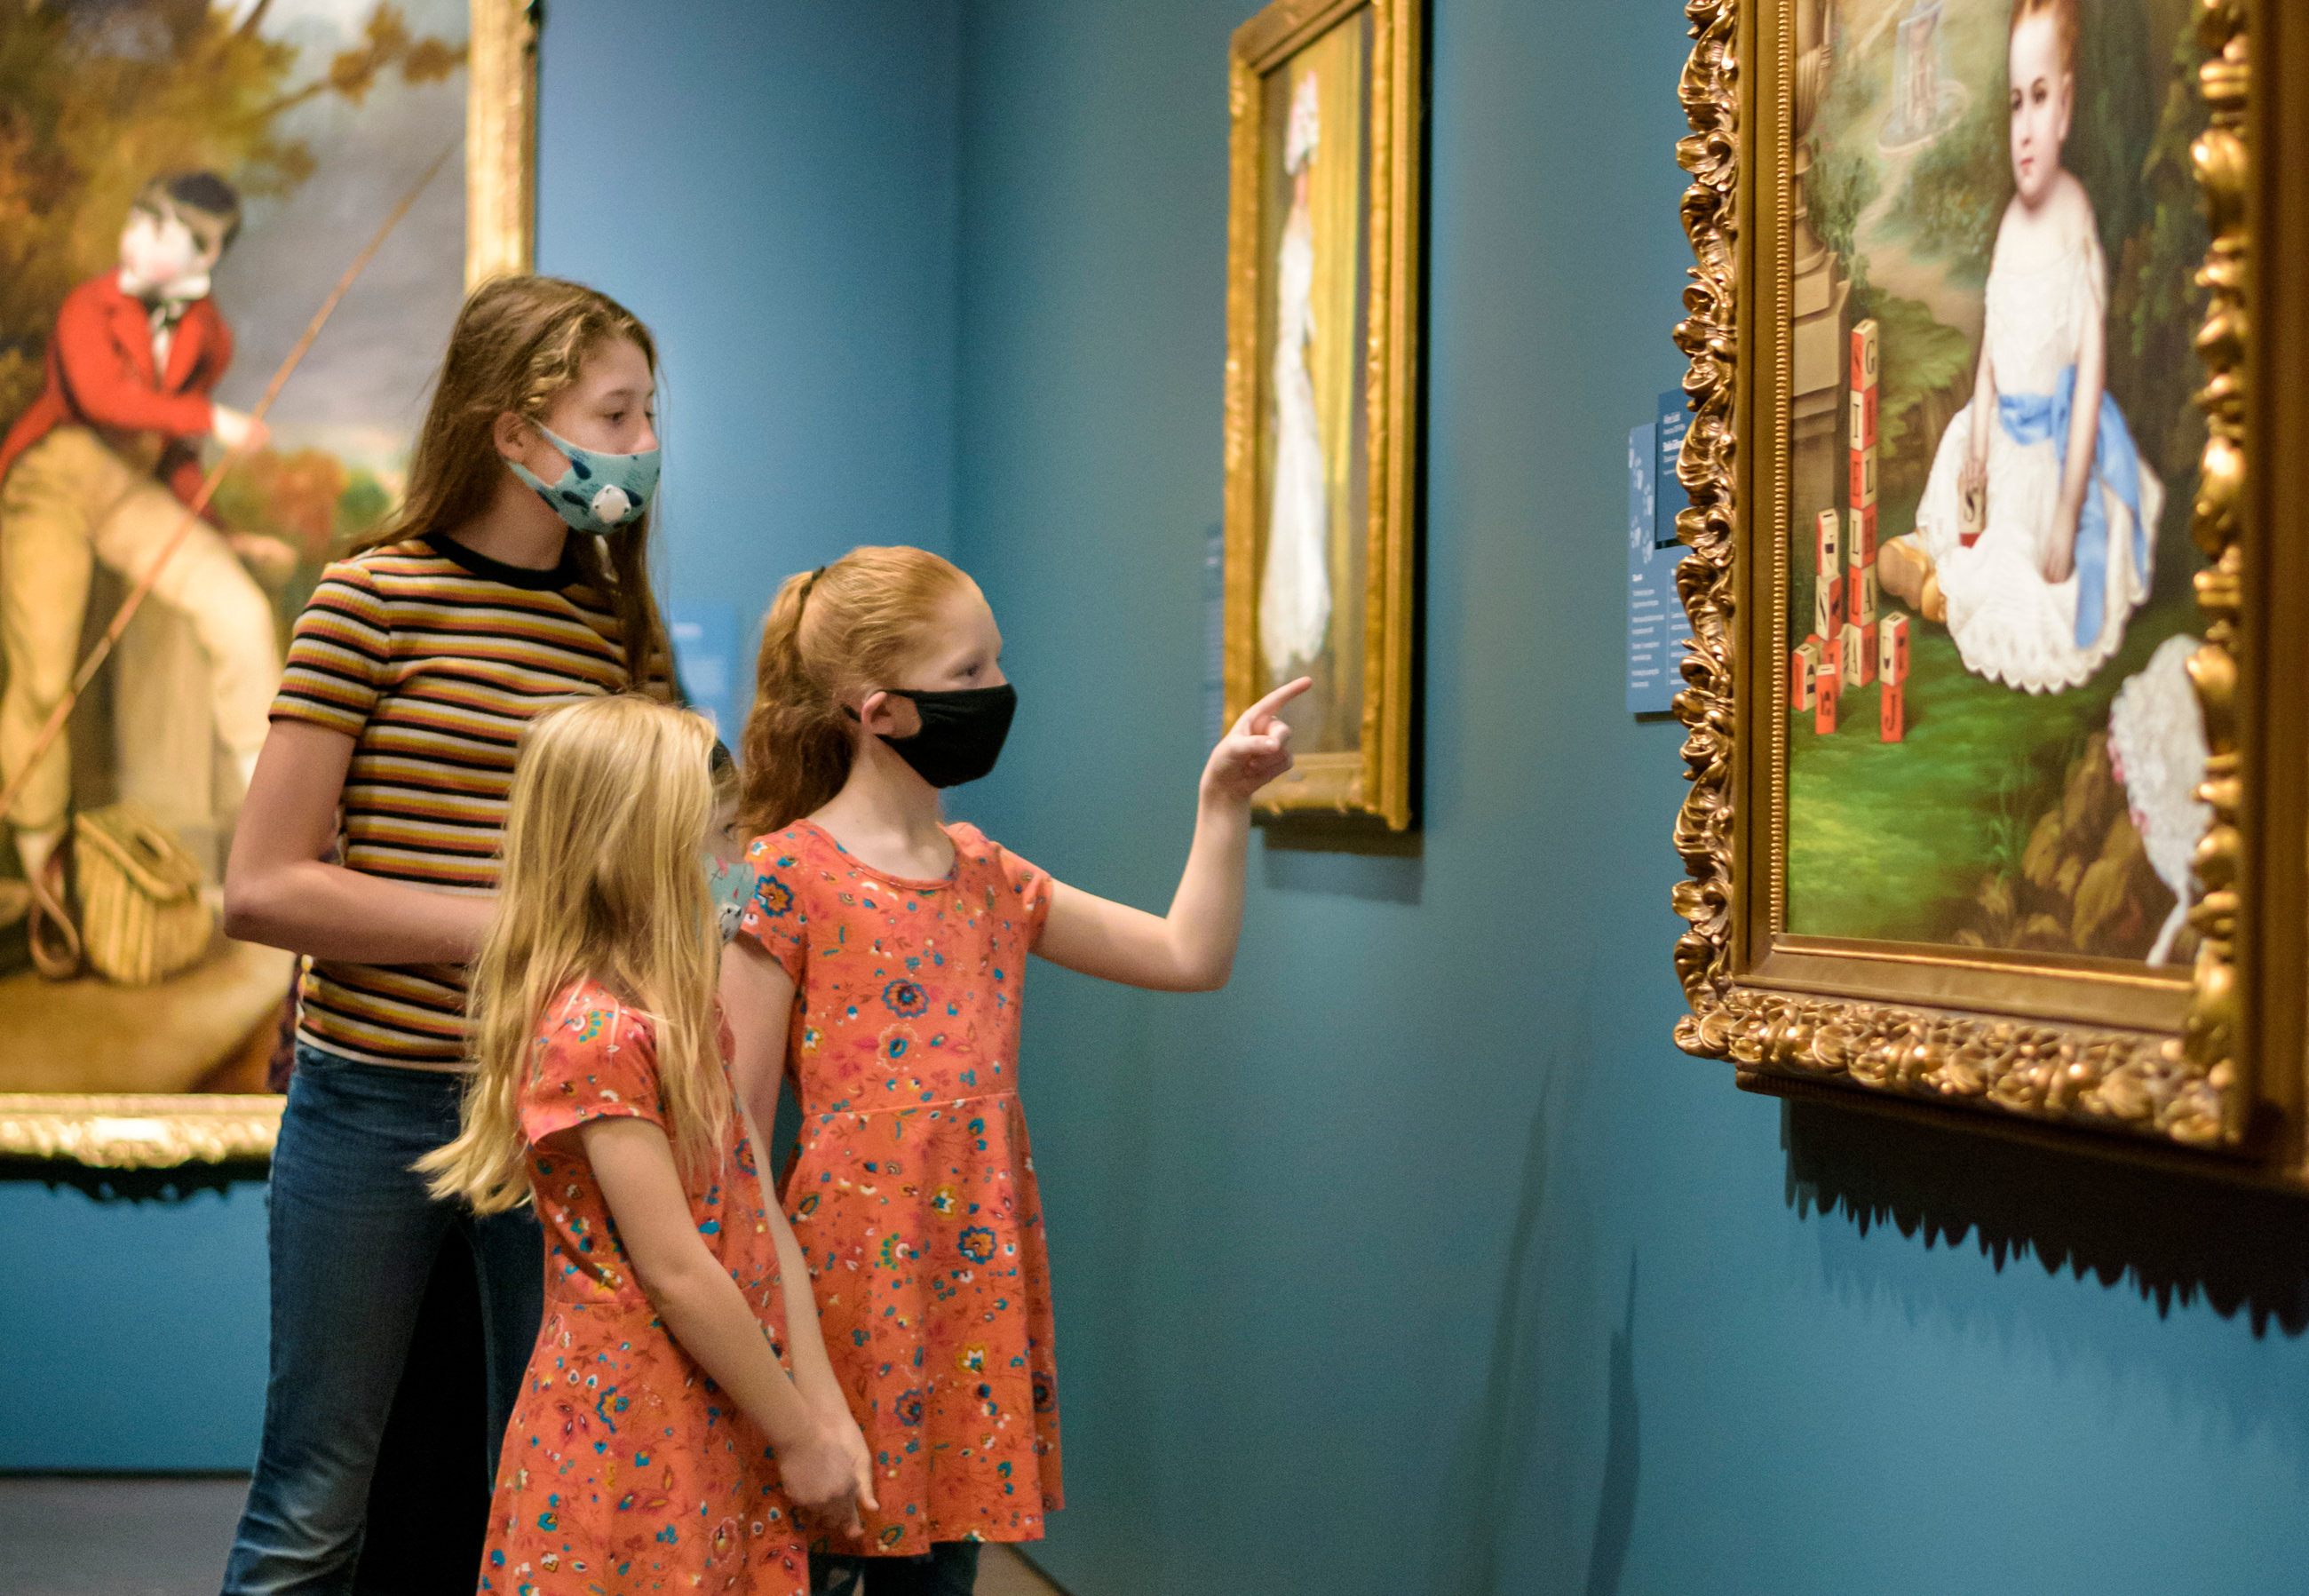 A family searches for clues in the paintings as they play a game created by the museum in the galleries